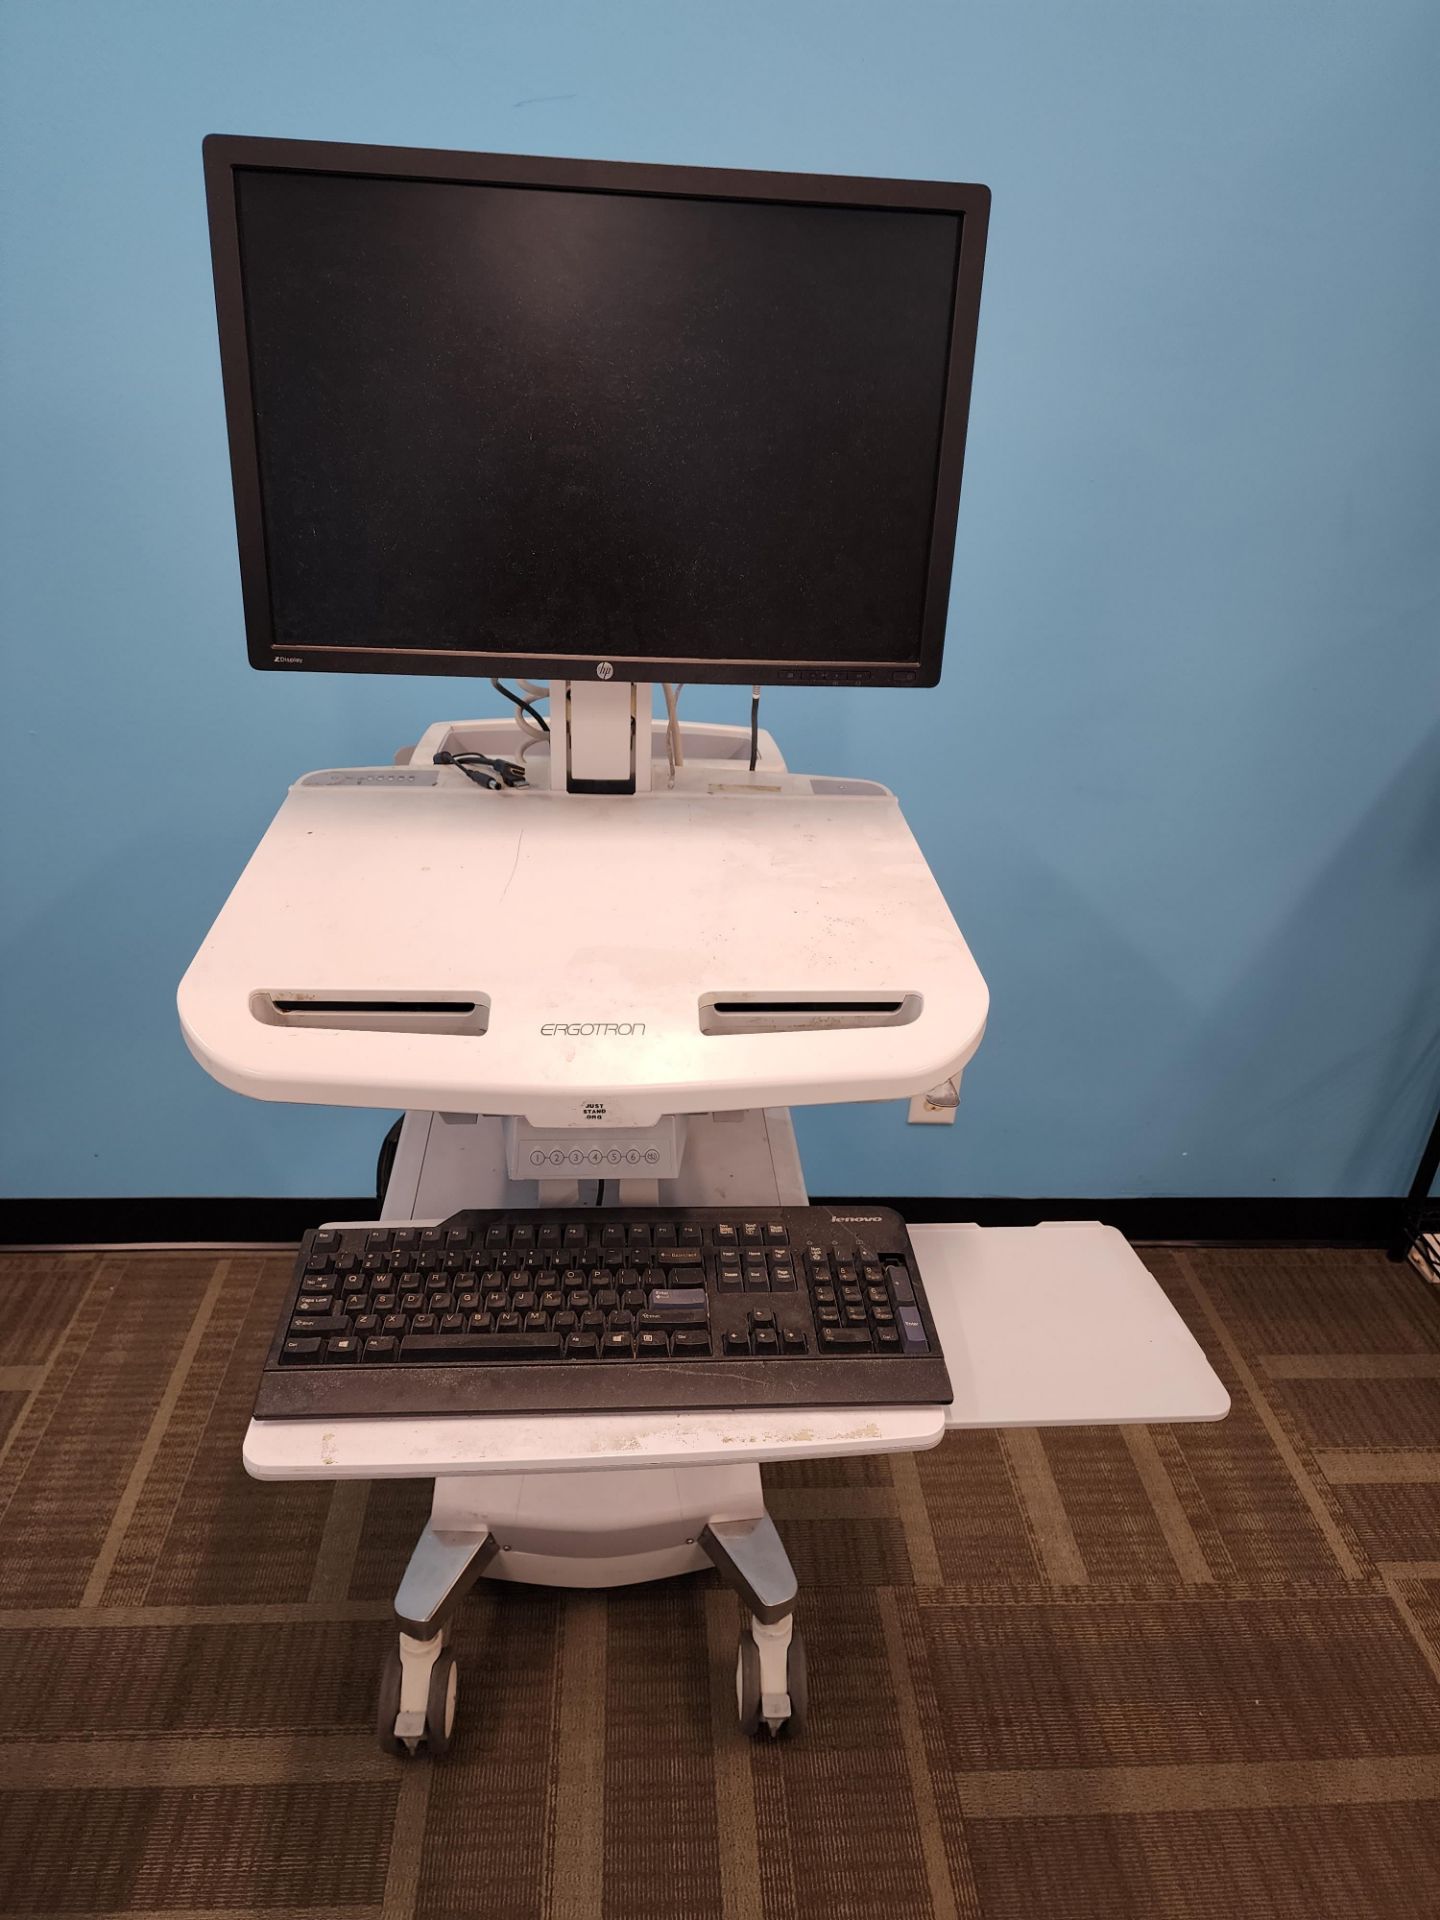 ErgoTron Model SV42-3311-1 "StyleView" Medical Cart w/LCD Mount & HP Monitor, SLA Powered, 1 - Image 2 of 10